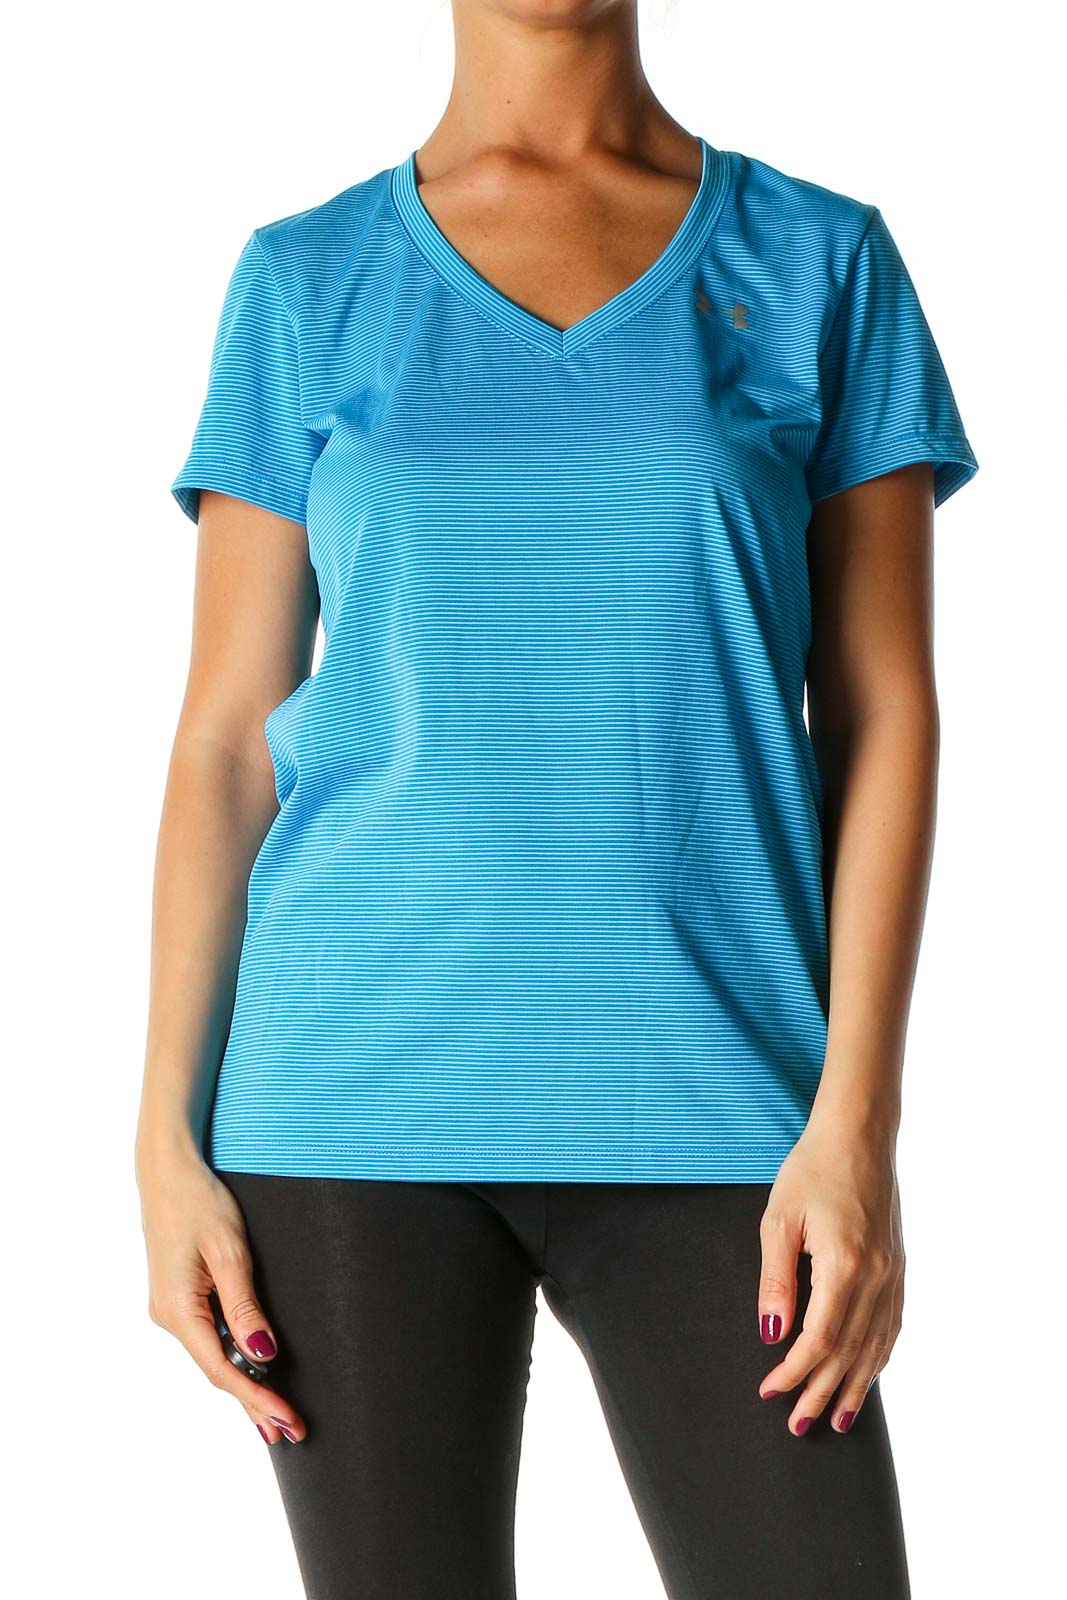 Blue Striped Activewear T-Shirt Front